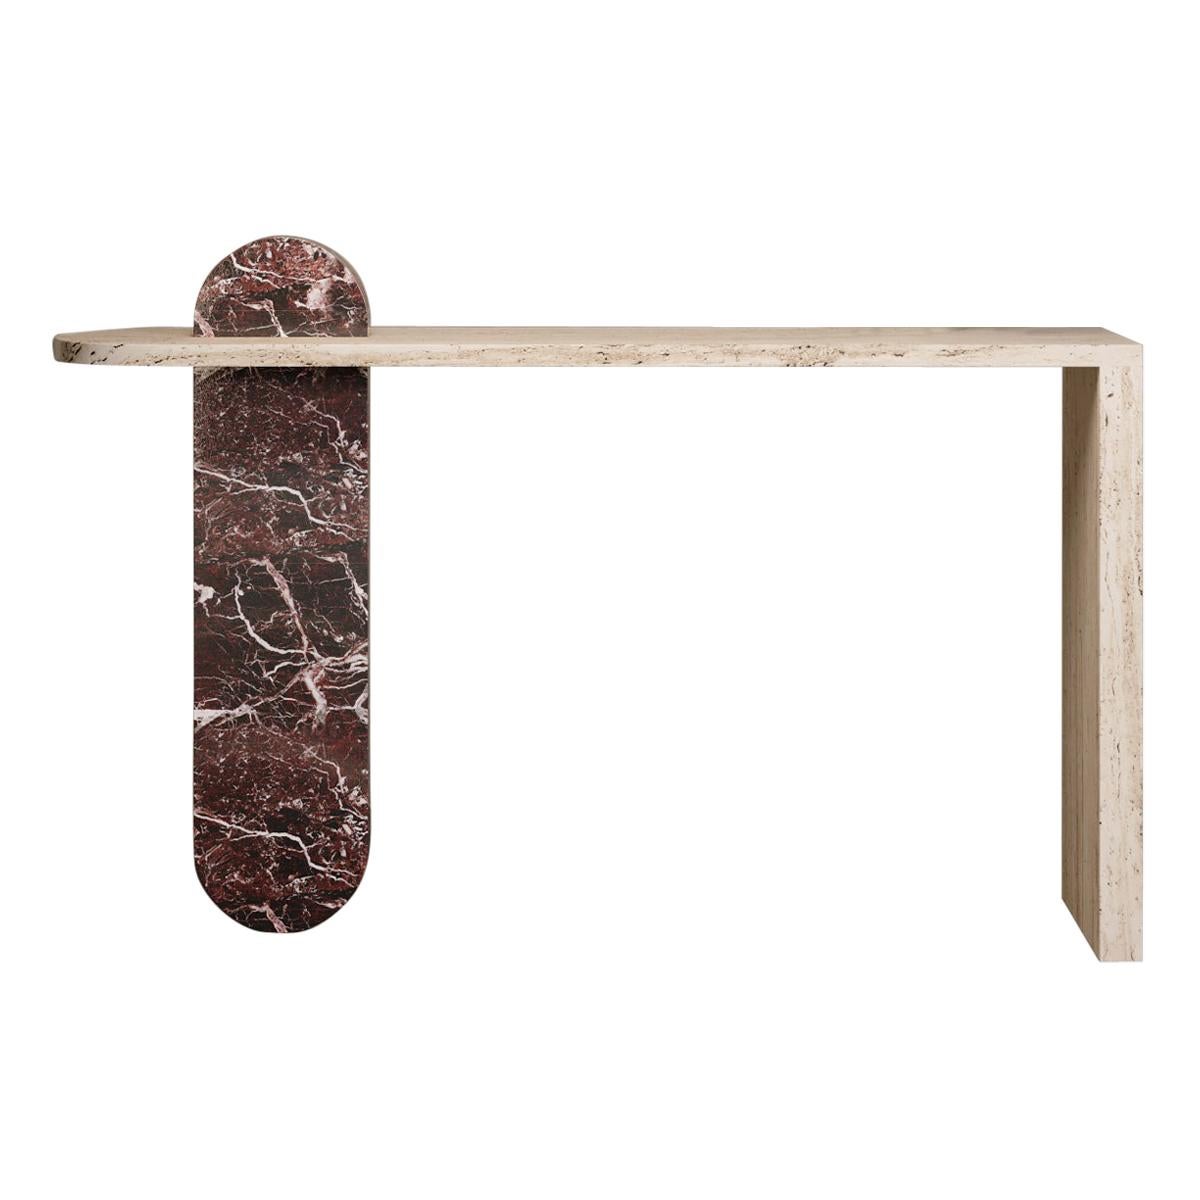 Bespoke Contemporary Architectural Marble Console Table, by Chapter Studio